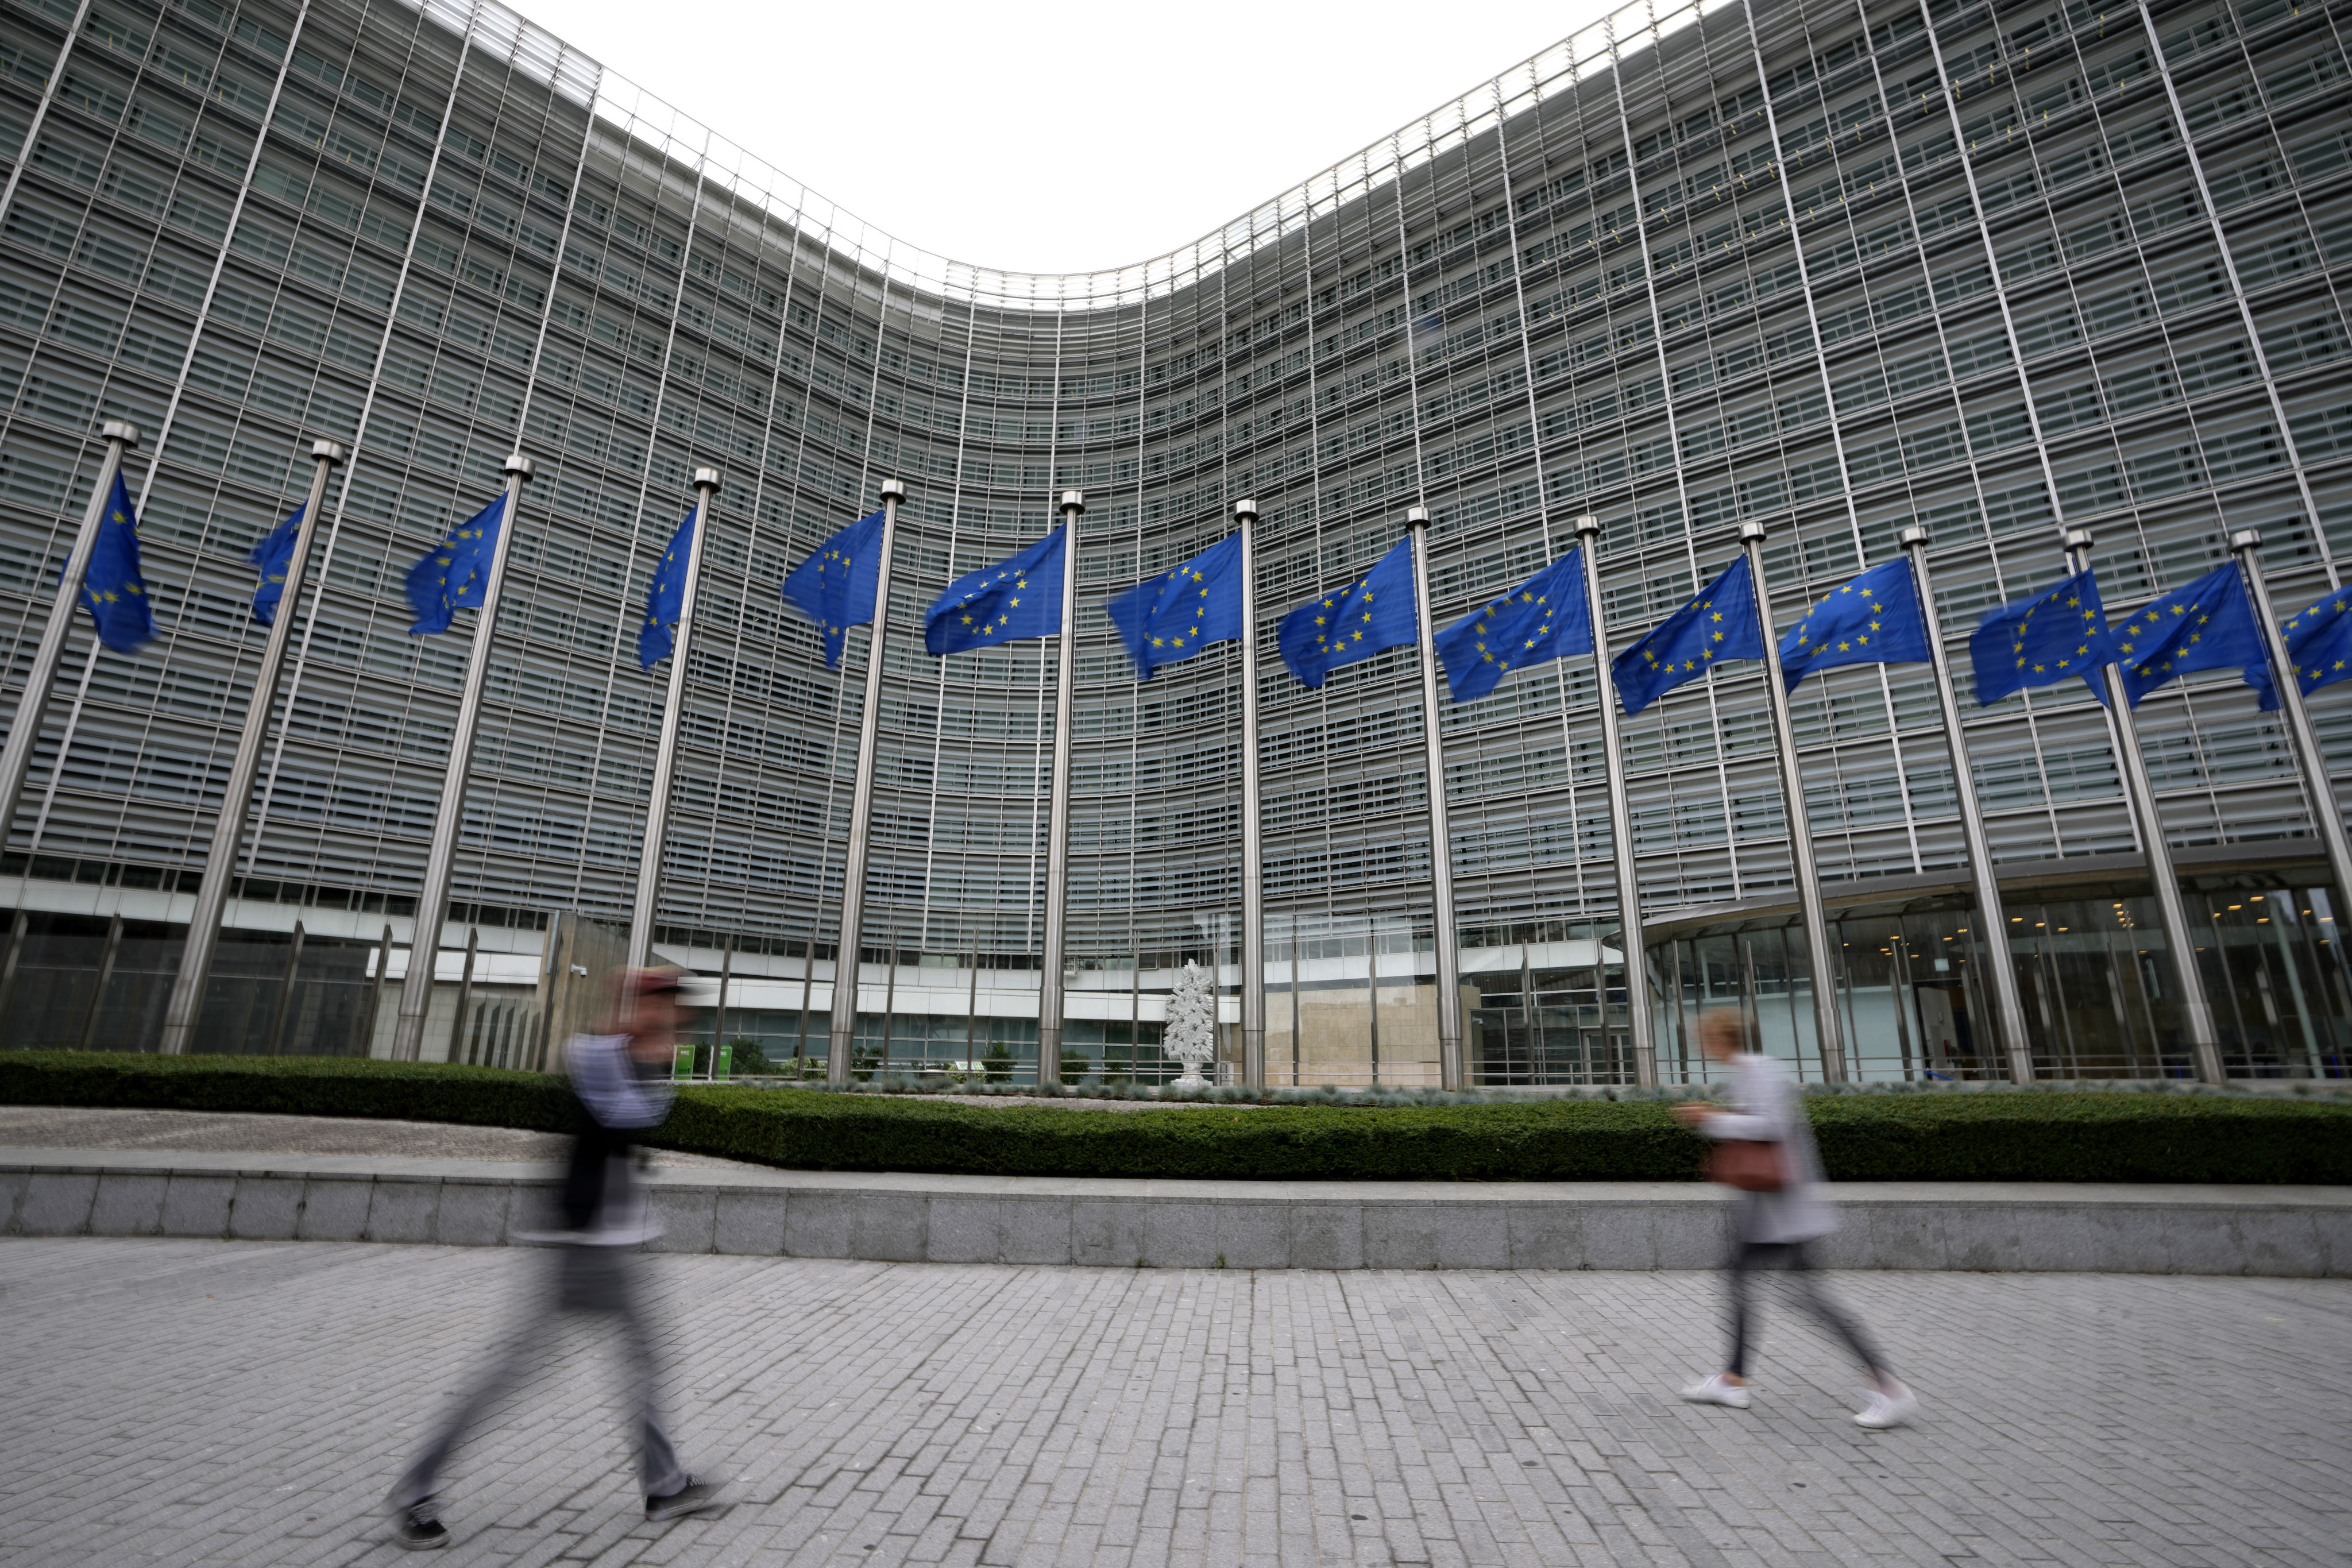 European Union flags flap in the wind as pedestrians walk by EU headquarters in Brussels. The law aims to protect women in the 27-nation European Union from gender-based violence, forced marriages, female genital mutilation and online harassment. Photo: AP